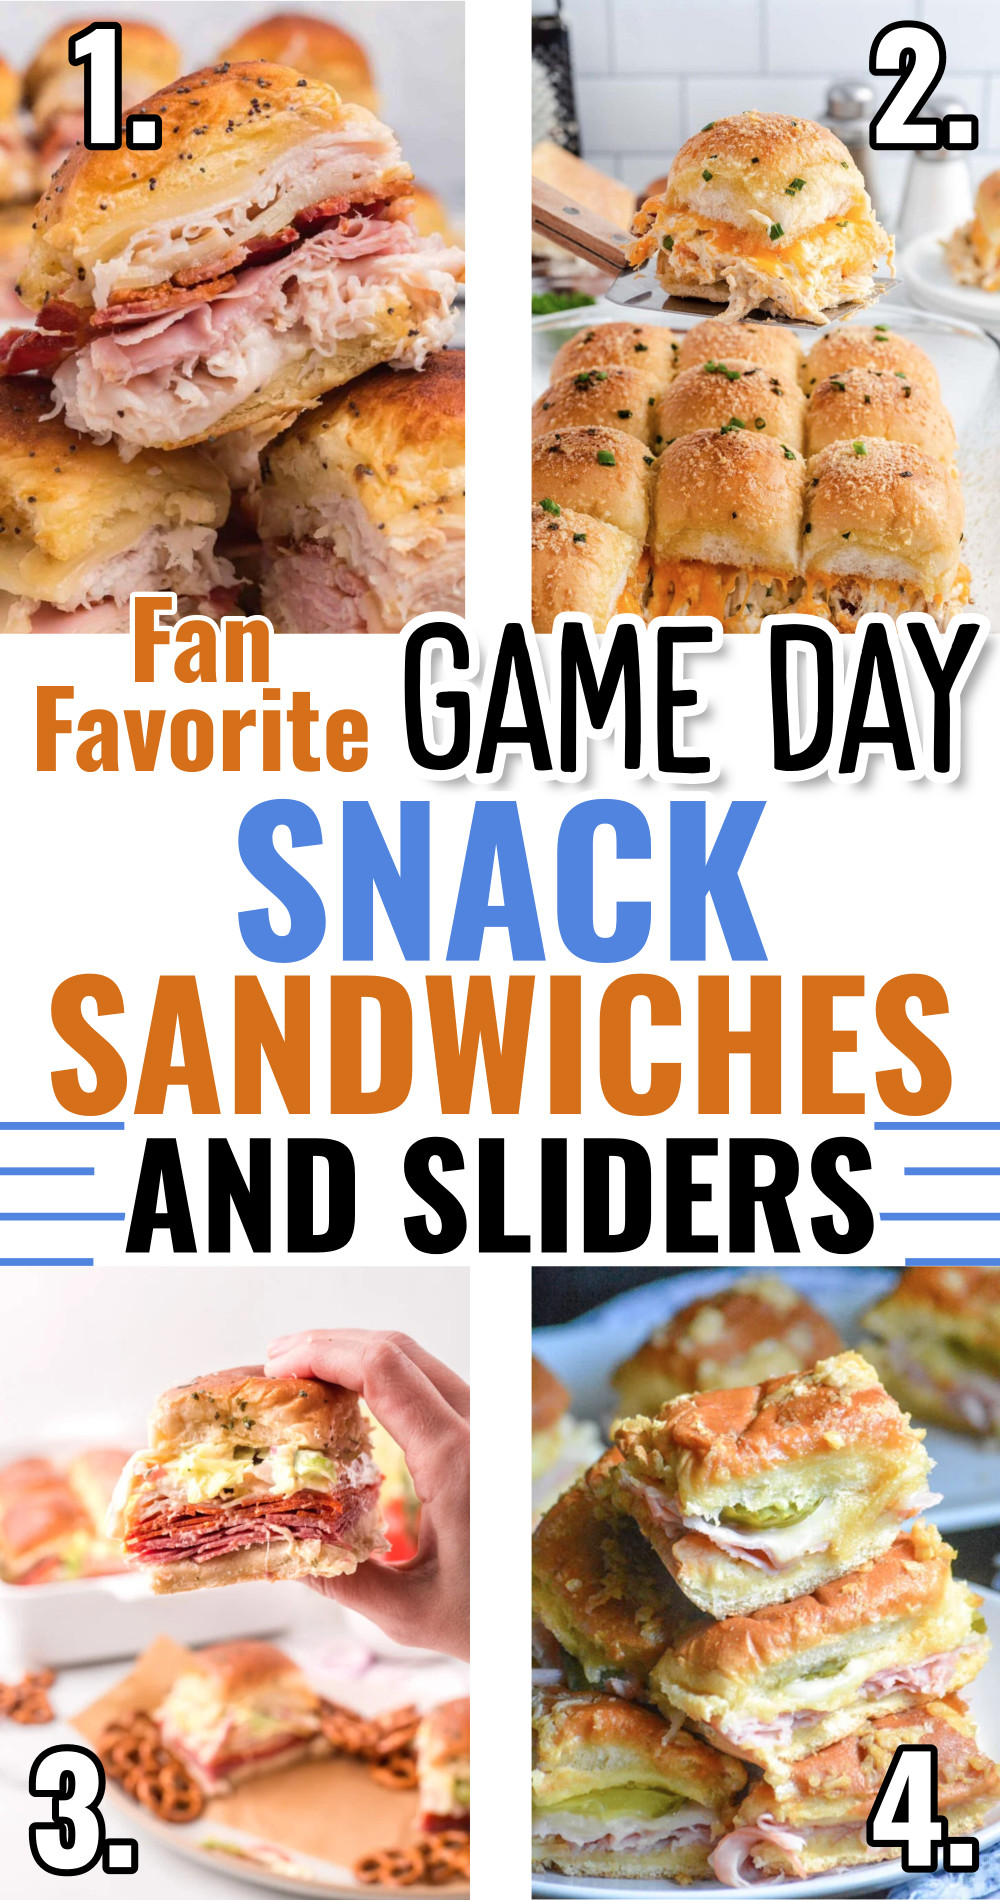 game day snack sandwiches and sliders